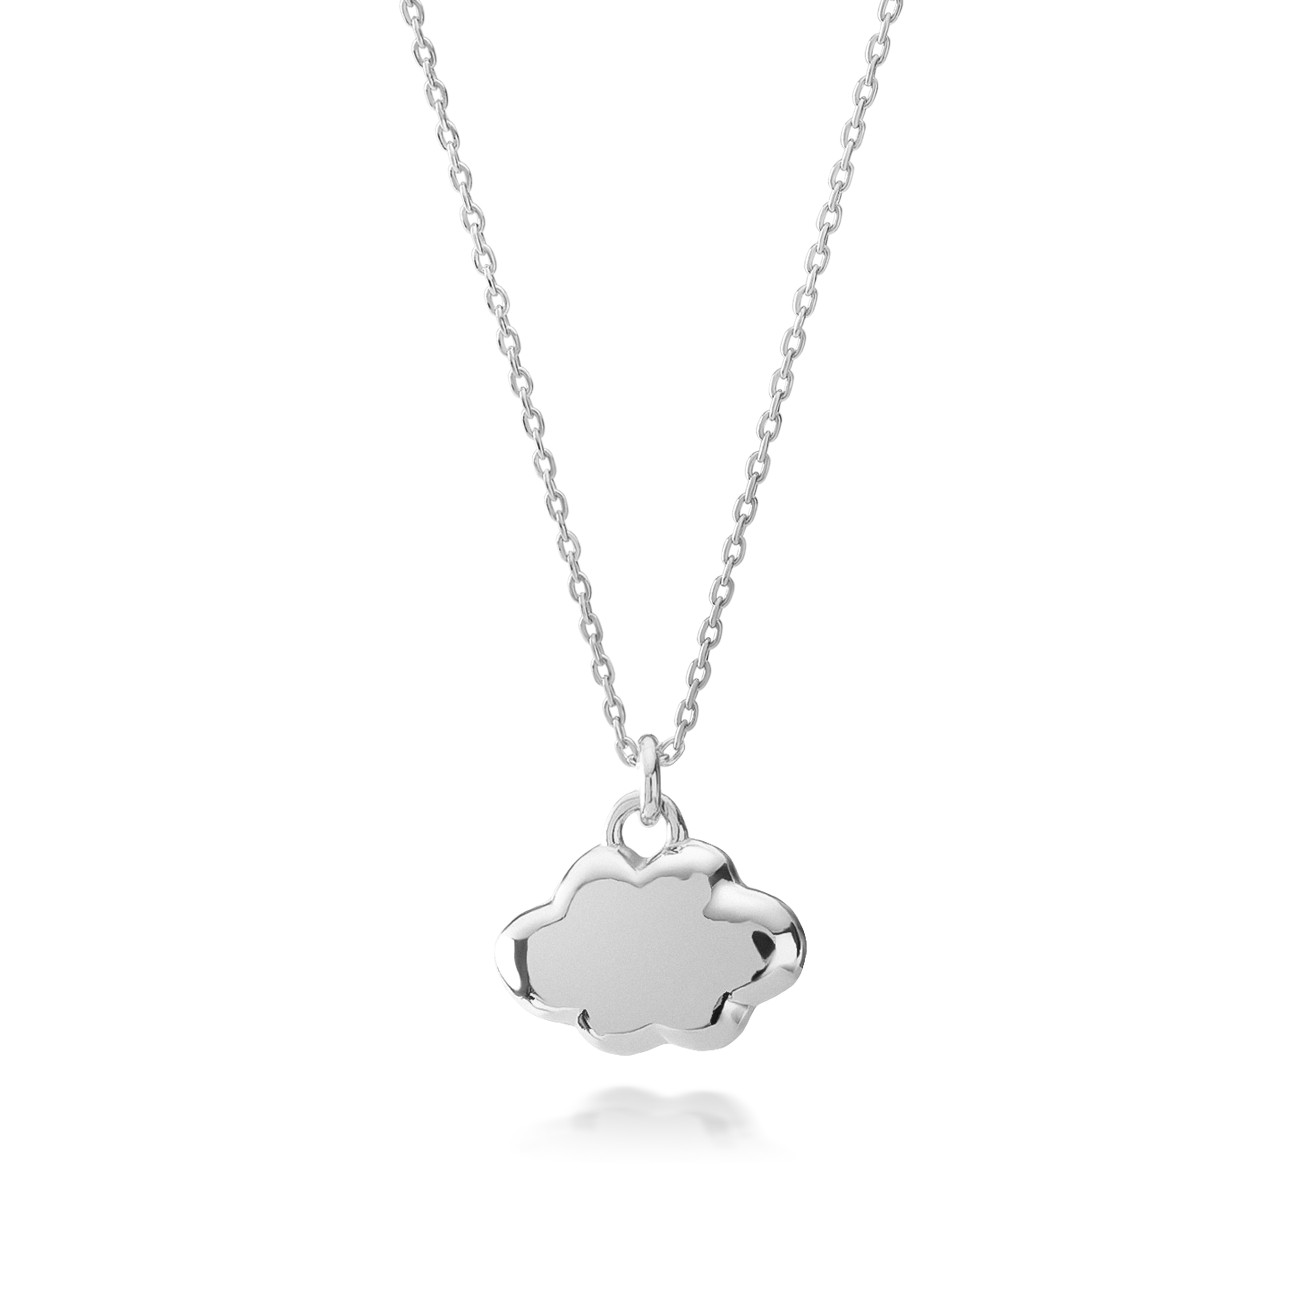 Silver cloud necklace, AUGUSTYNKA x GIORRE